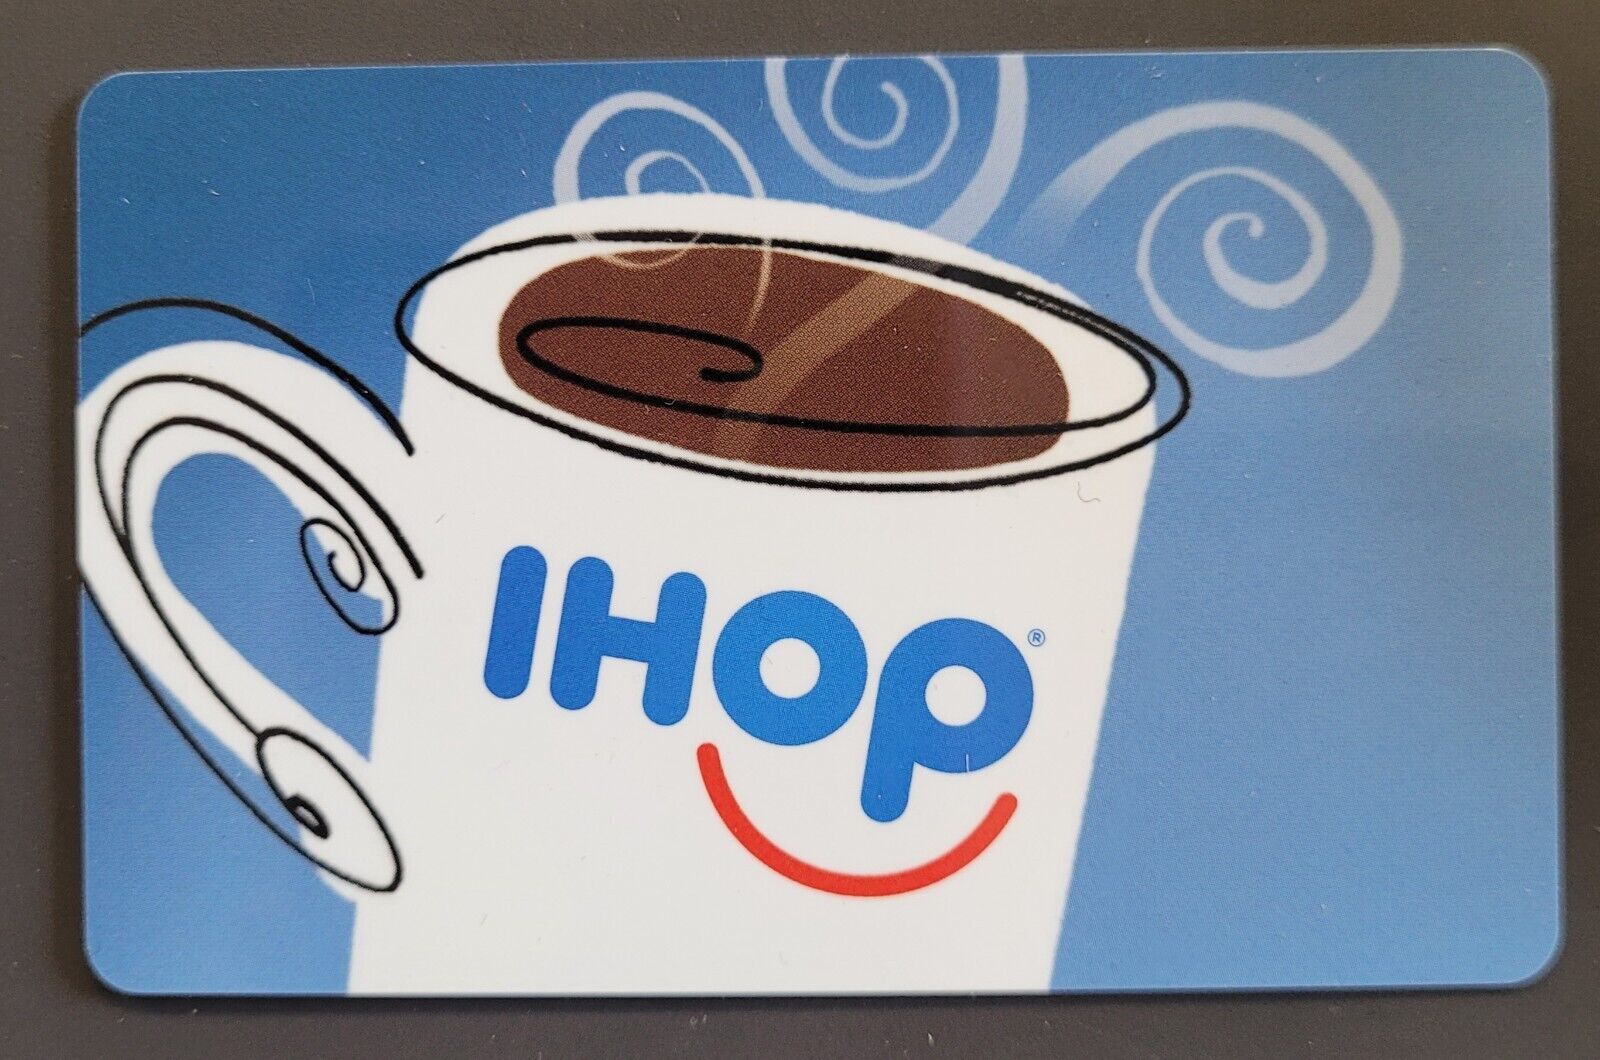 IHOP Restaurant Coffee Gift Card No $ Value Collectible